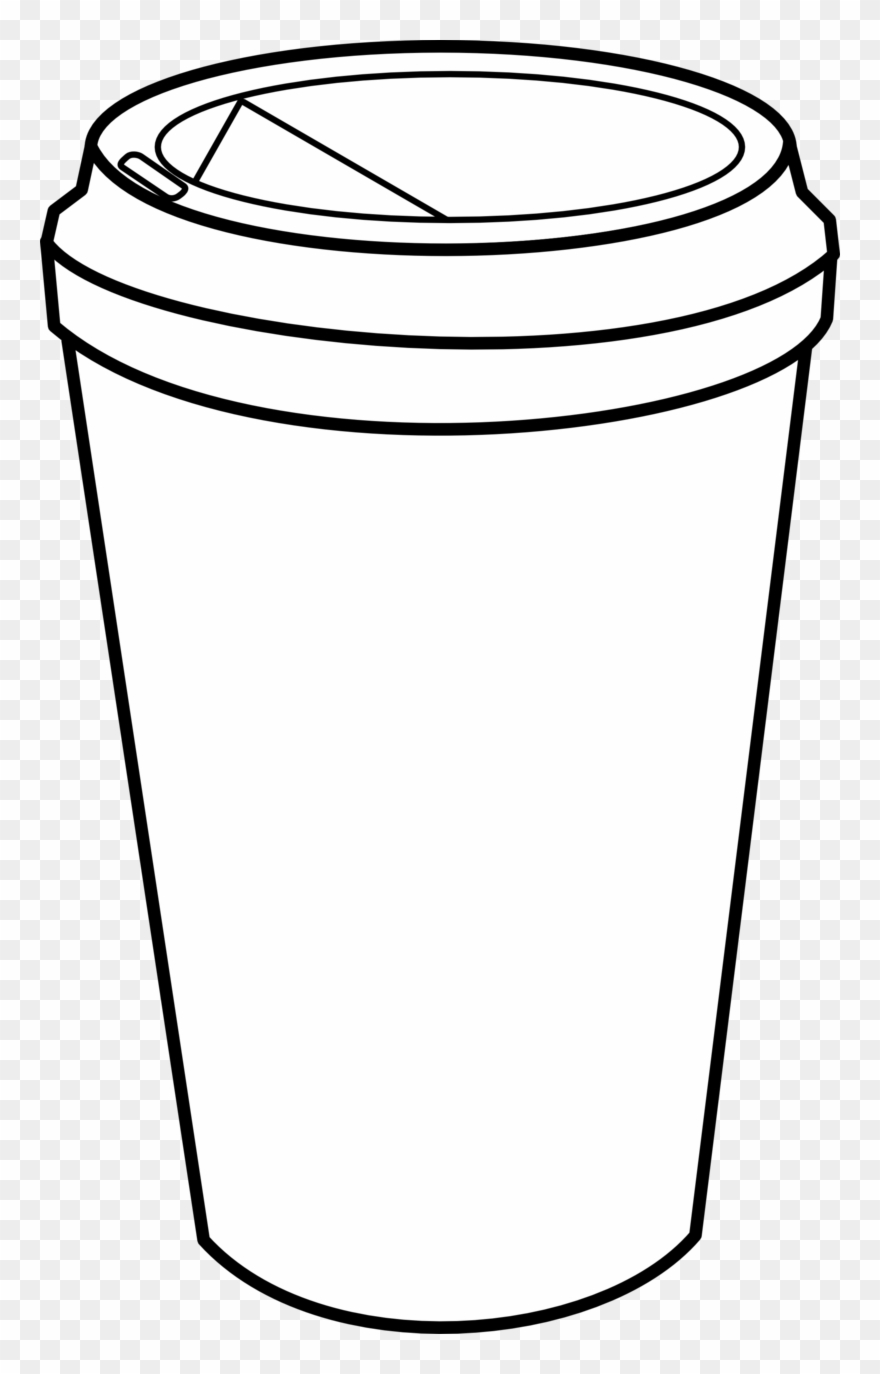 cups clipart tumbler cup